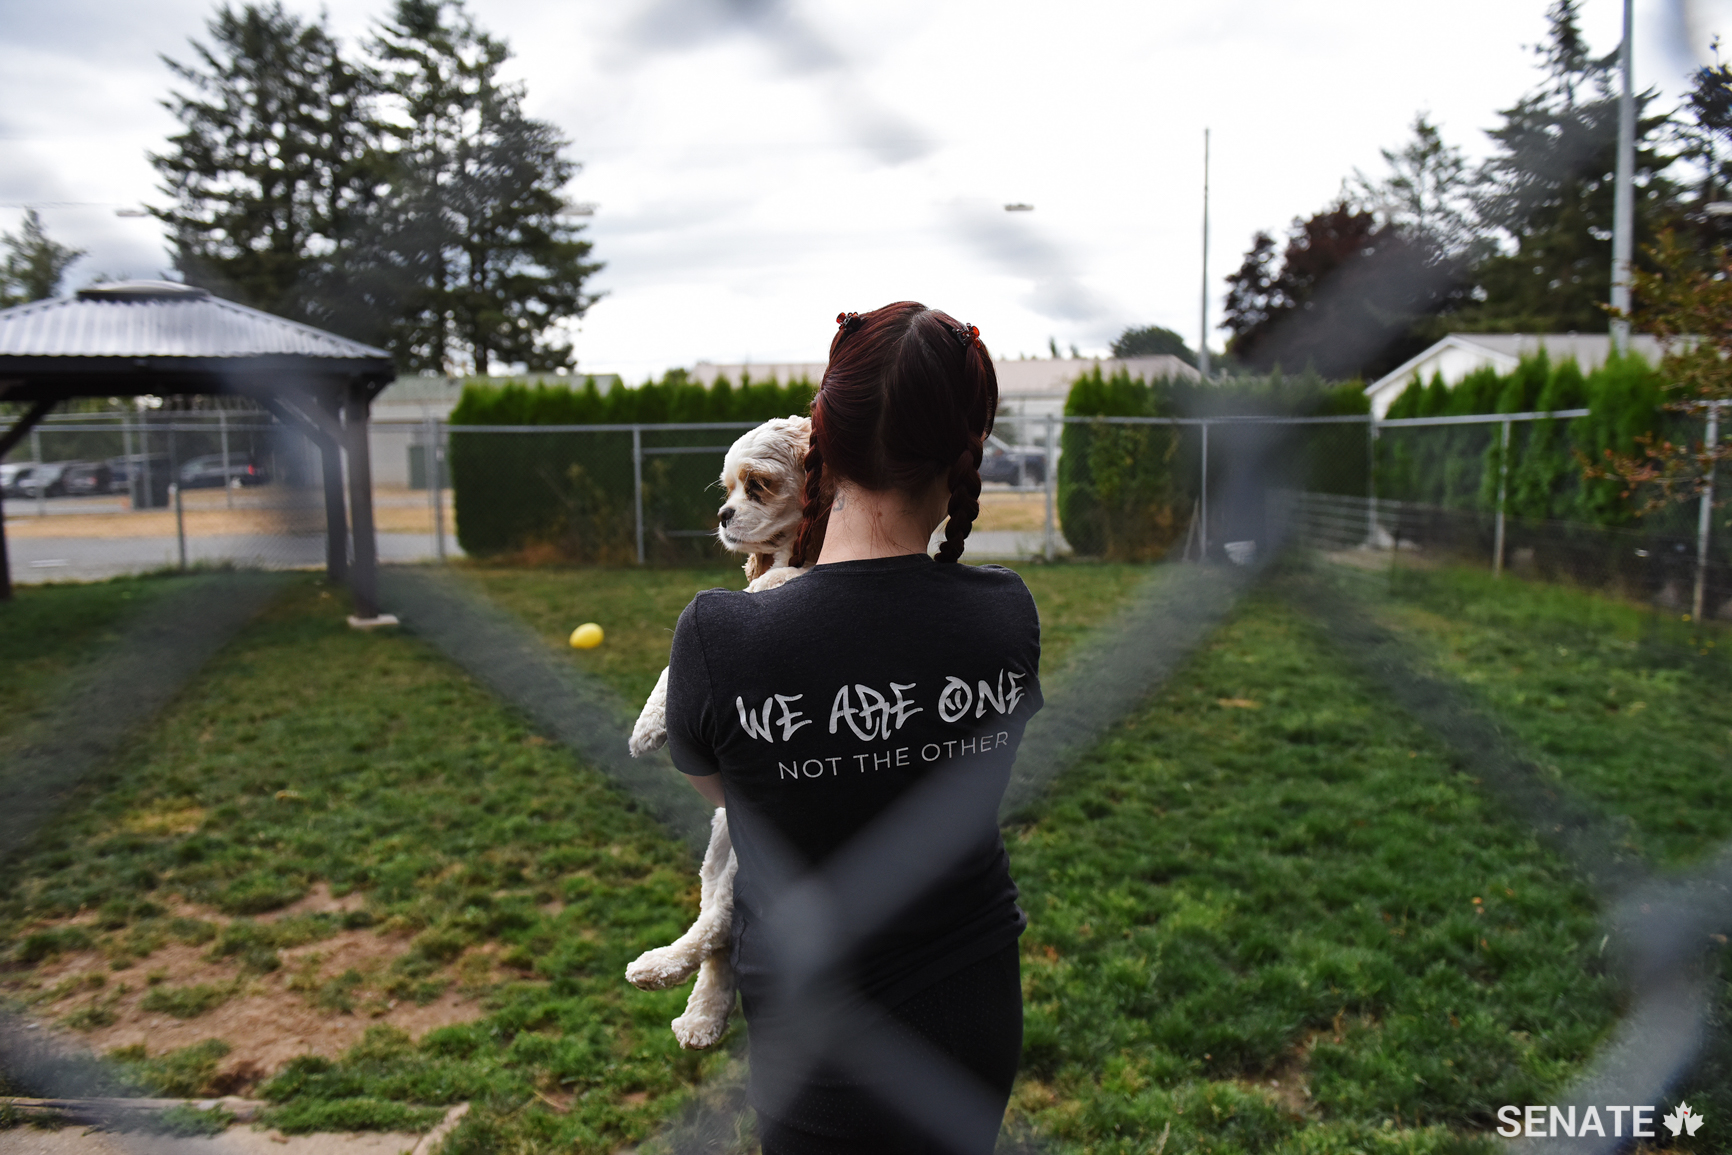 The Fraser Valley prison has a special partner program with the Langley Animal Protection Society called the “Doghouse”—a dog daycare and kennel where prisoners can learn job skills.